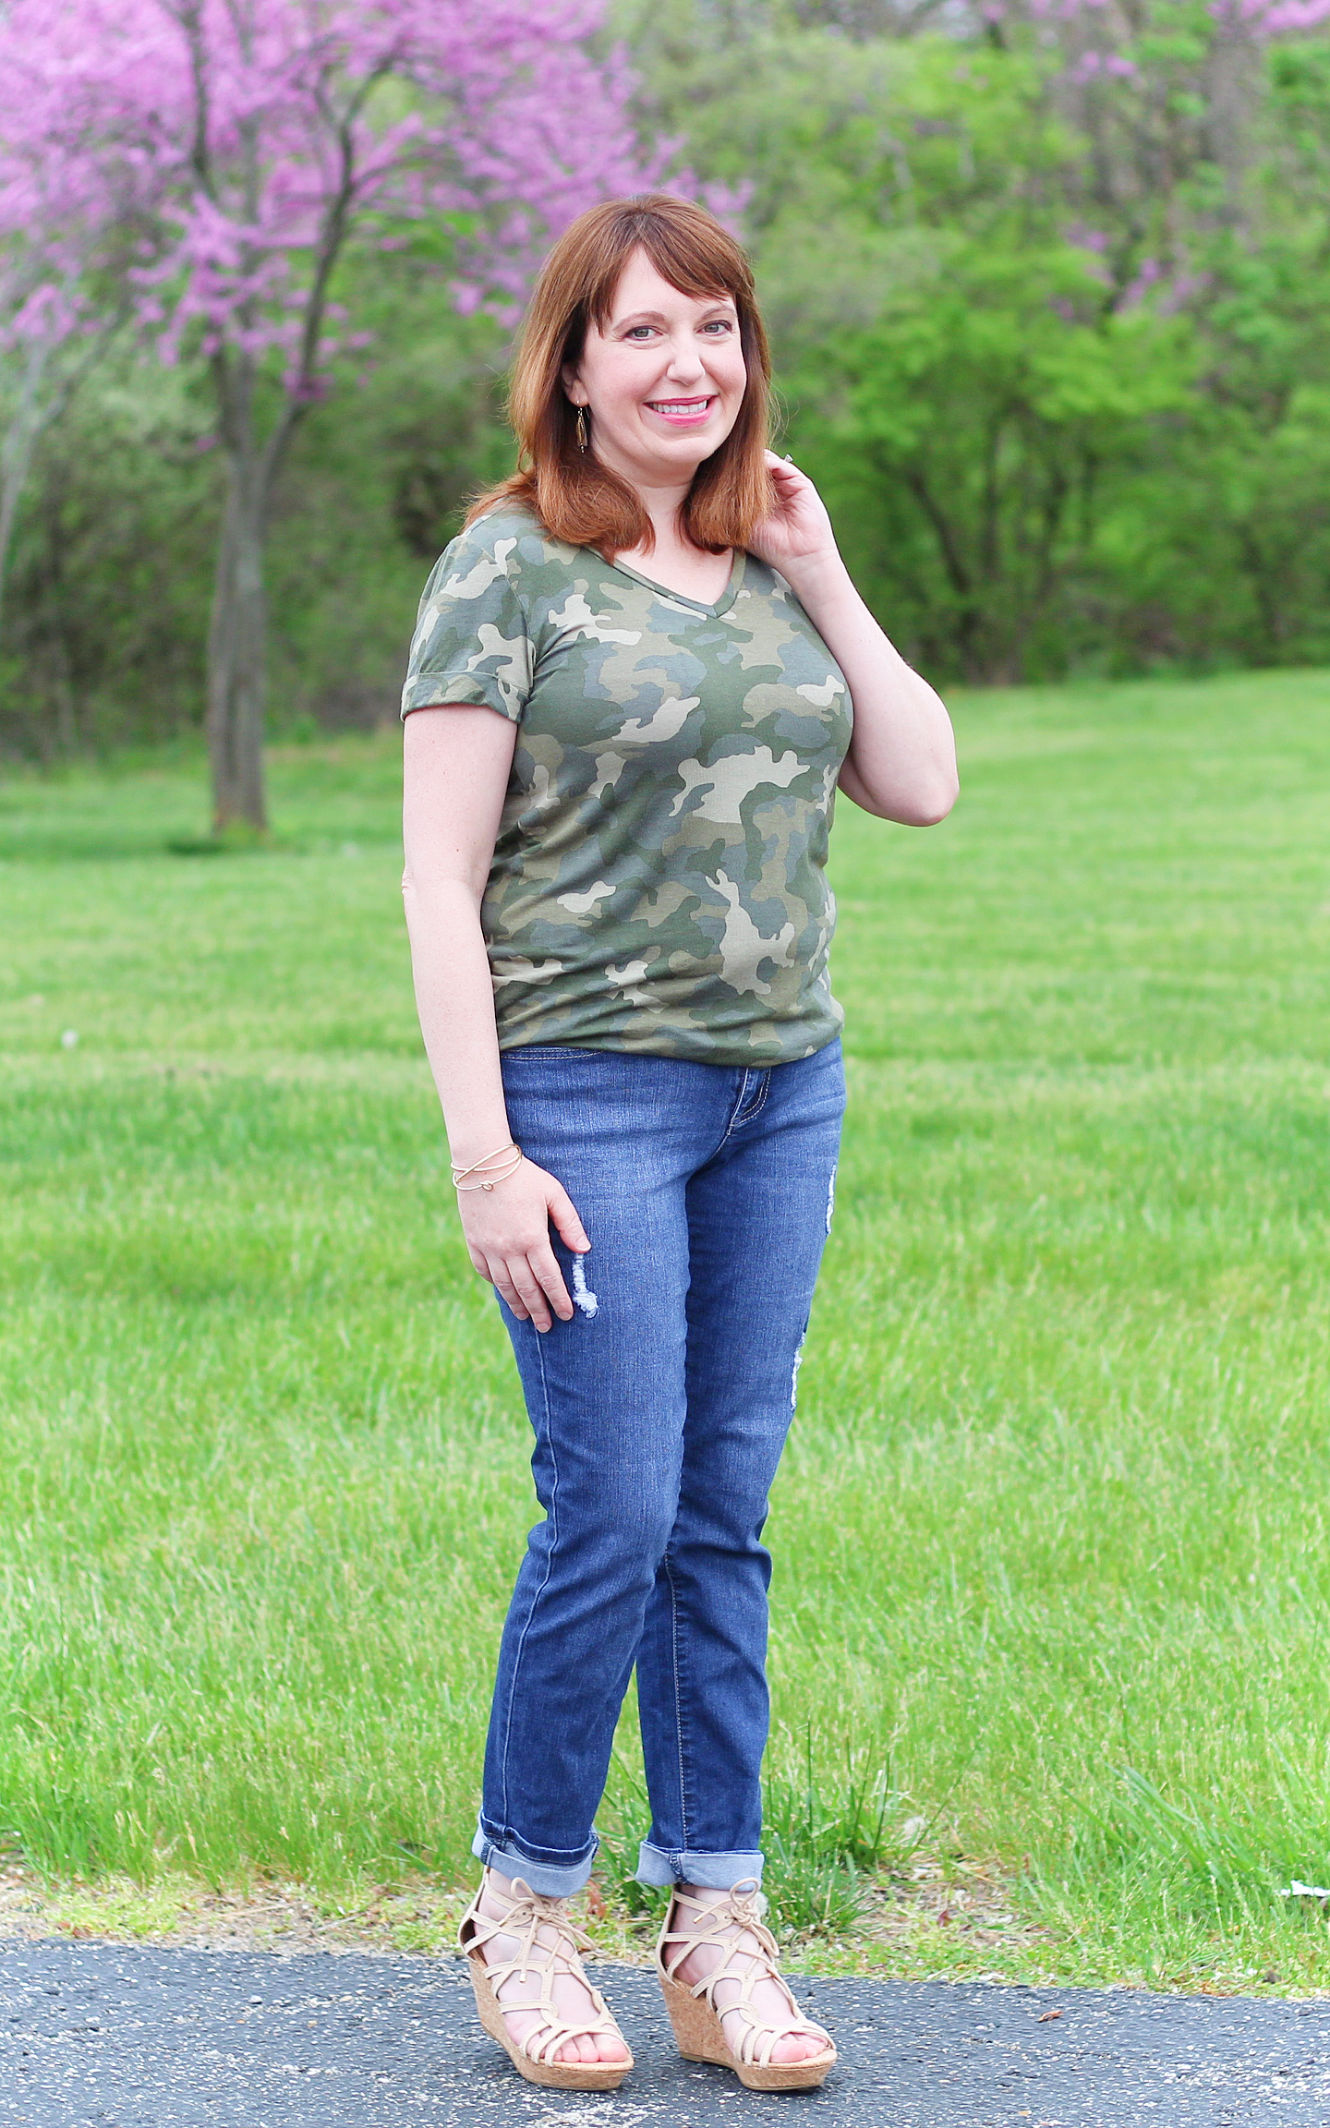 Camo Tee And Jeans Spring Outfit #overfortyfashion #style #fashion #camotee